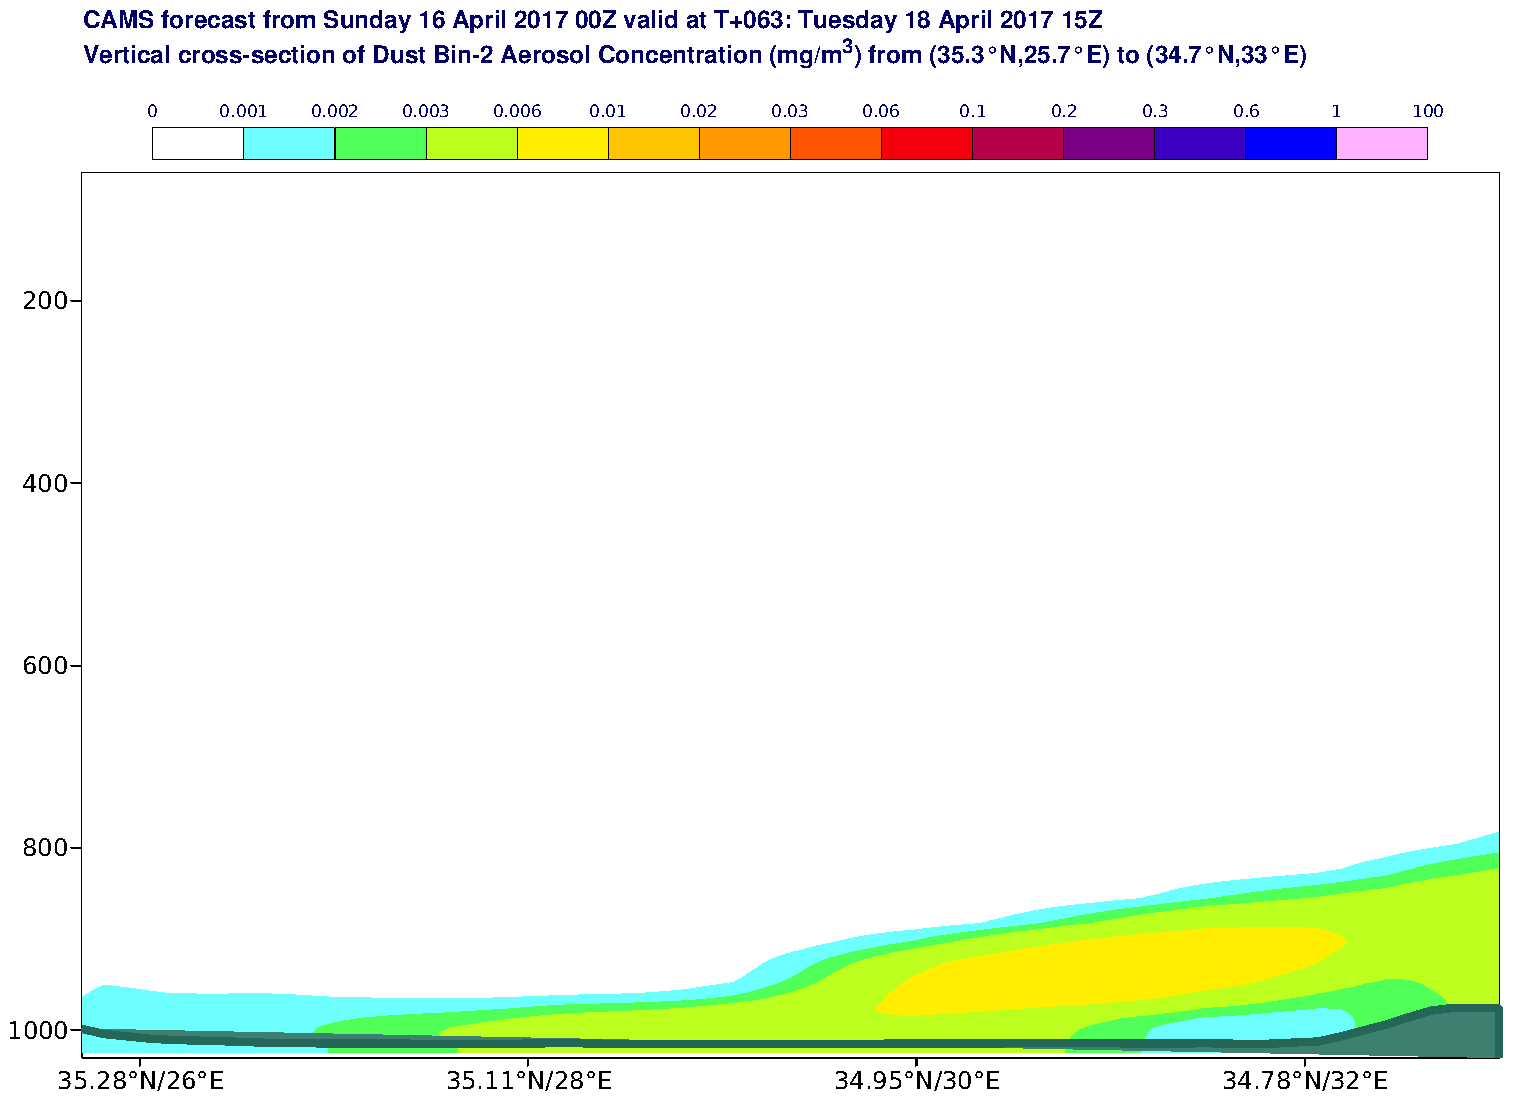 Vertical cross-section of Dust Bin-2 Aerosol Concentration (mg/m3) valid at T63 - 2017-04-18 15:00